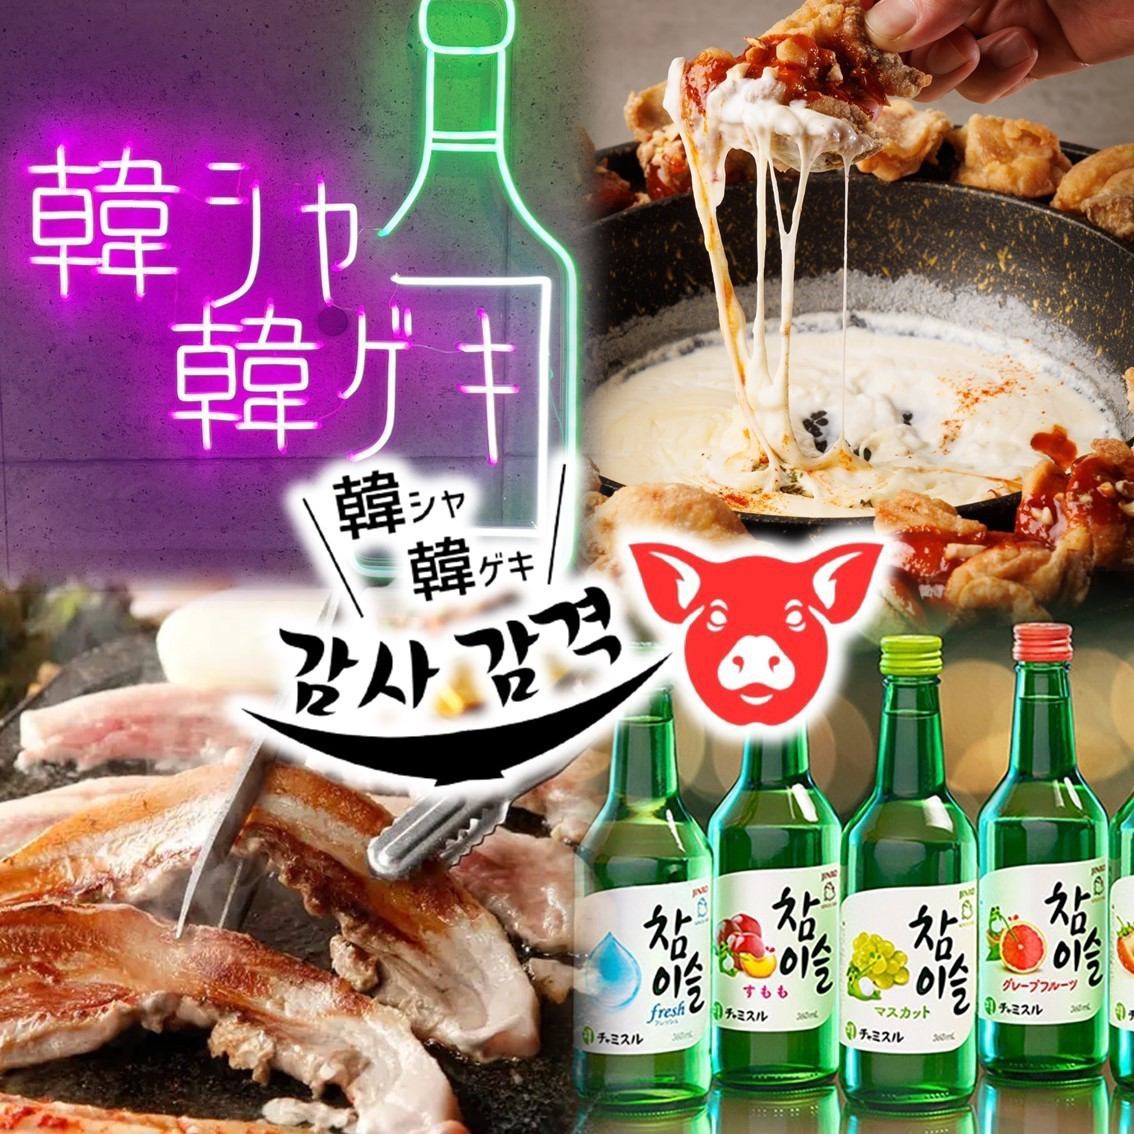 A Korean izakaya where you can enjoy all-you-can-eat and drink including Samgyeopsal and UFO chicken is now open in Susukino☆